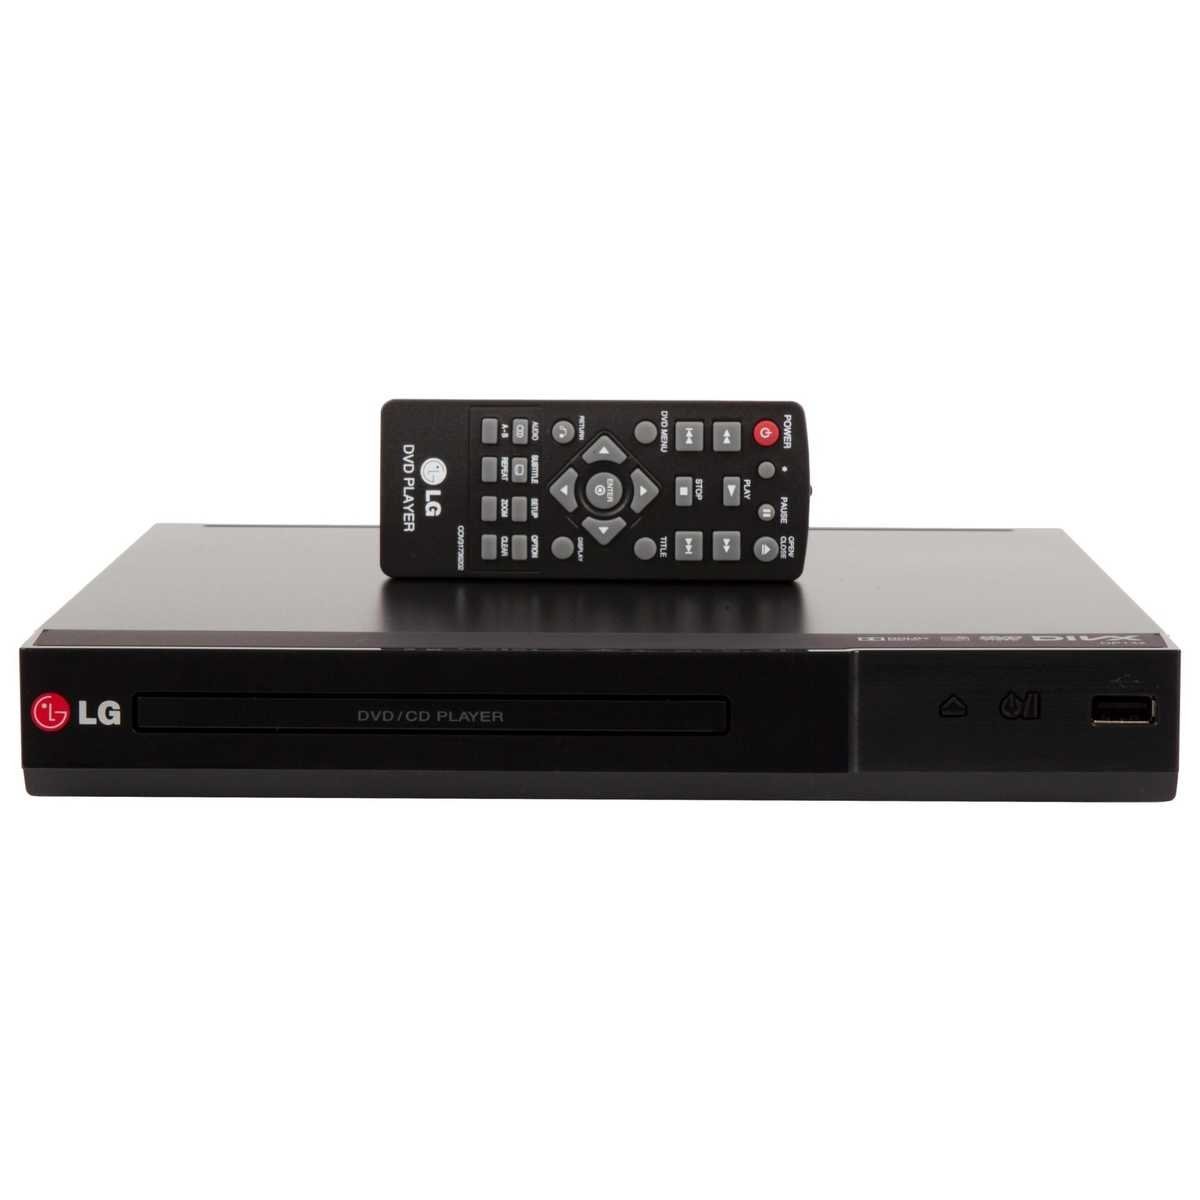 DP132 Free DVD Player - Any DVD From Any Country